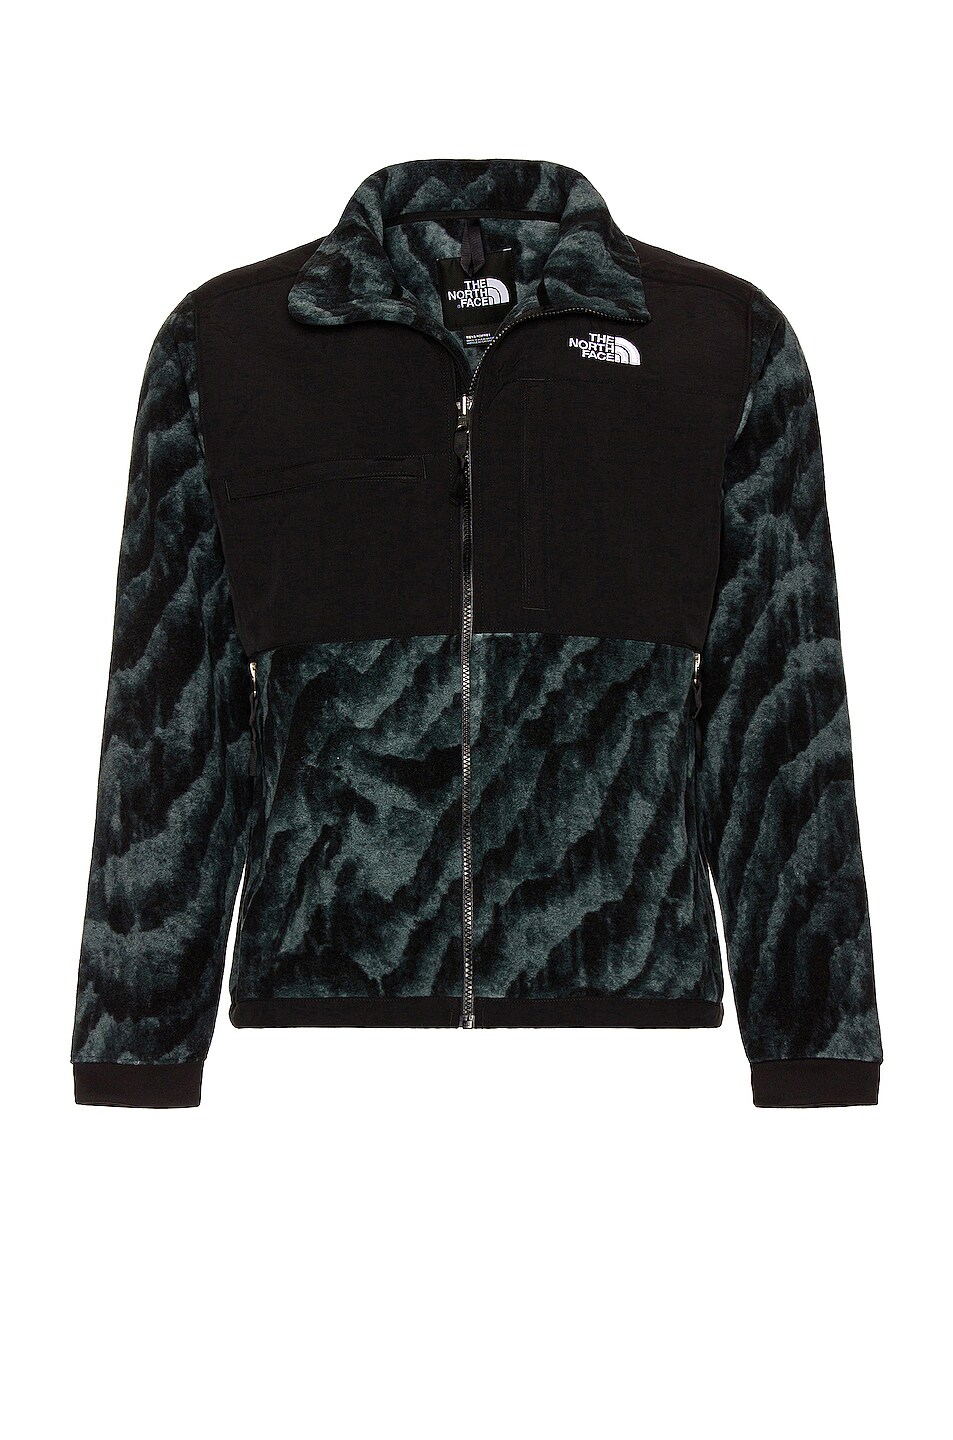 Image 1 of The North Face Printed Denali Jacket in Balsam Green Wooden Tiger Print